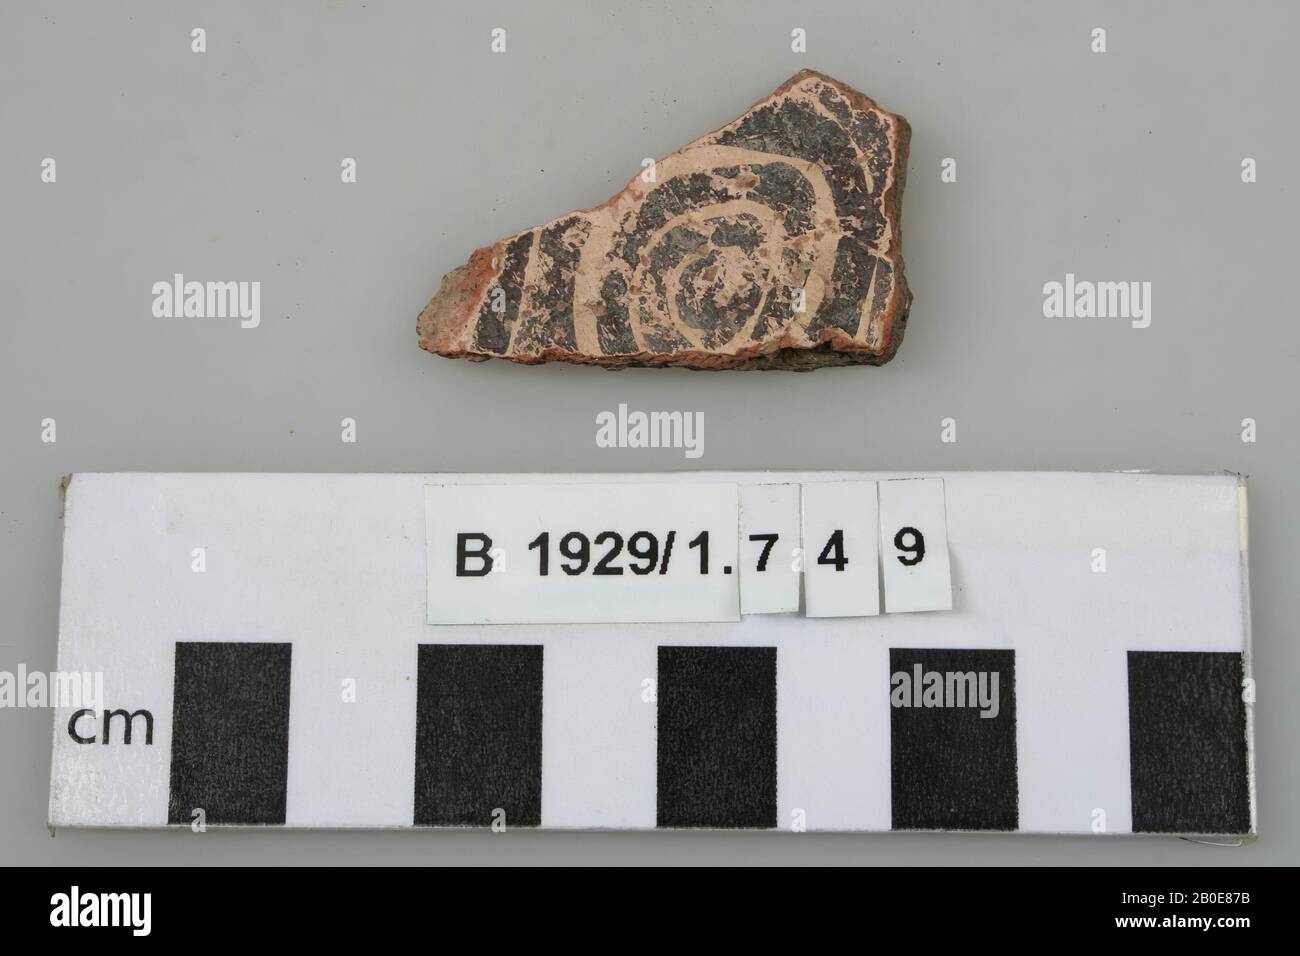 An earthenware shard with black concentric circles on a white sludge layer, crockery, earthenware, B 4.5 cm, Islamic Period 630-1516 AD, Palestine Stock Photo